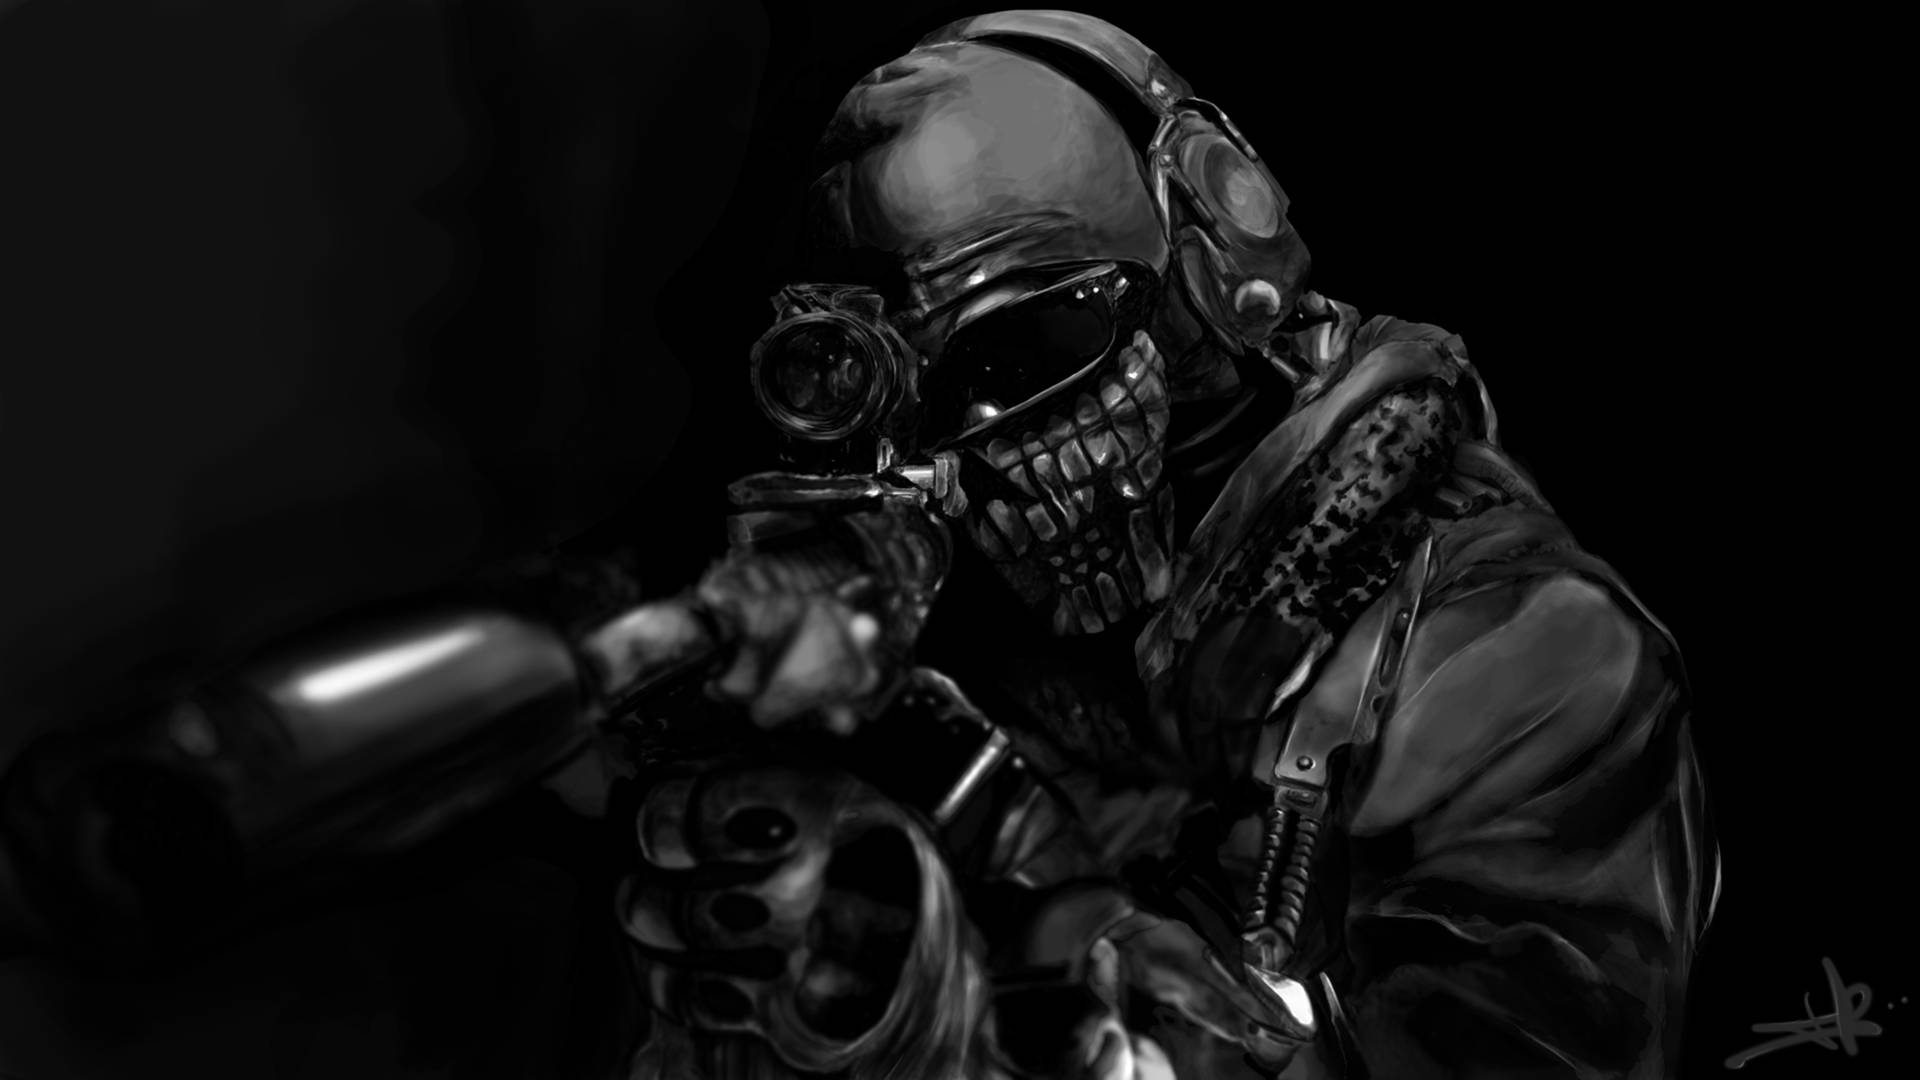 Call Of Duty Black Ops Soldier in 4K Resolution Wallpaper